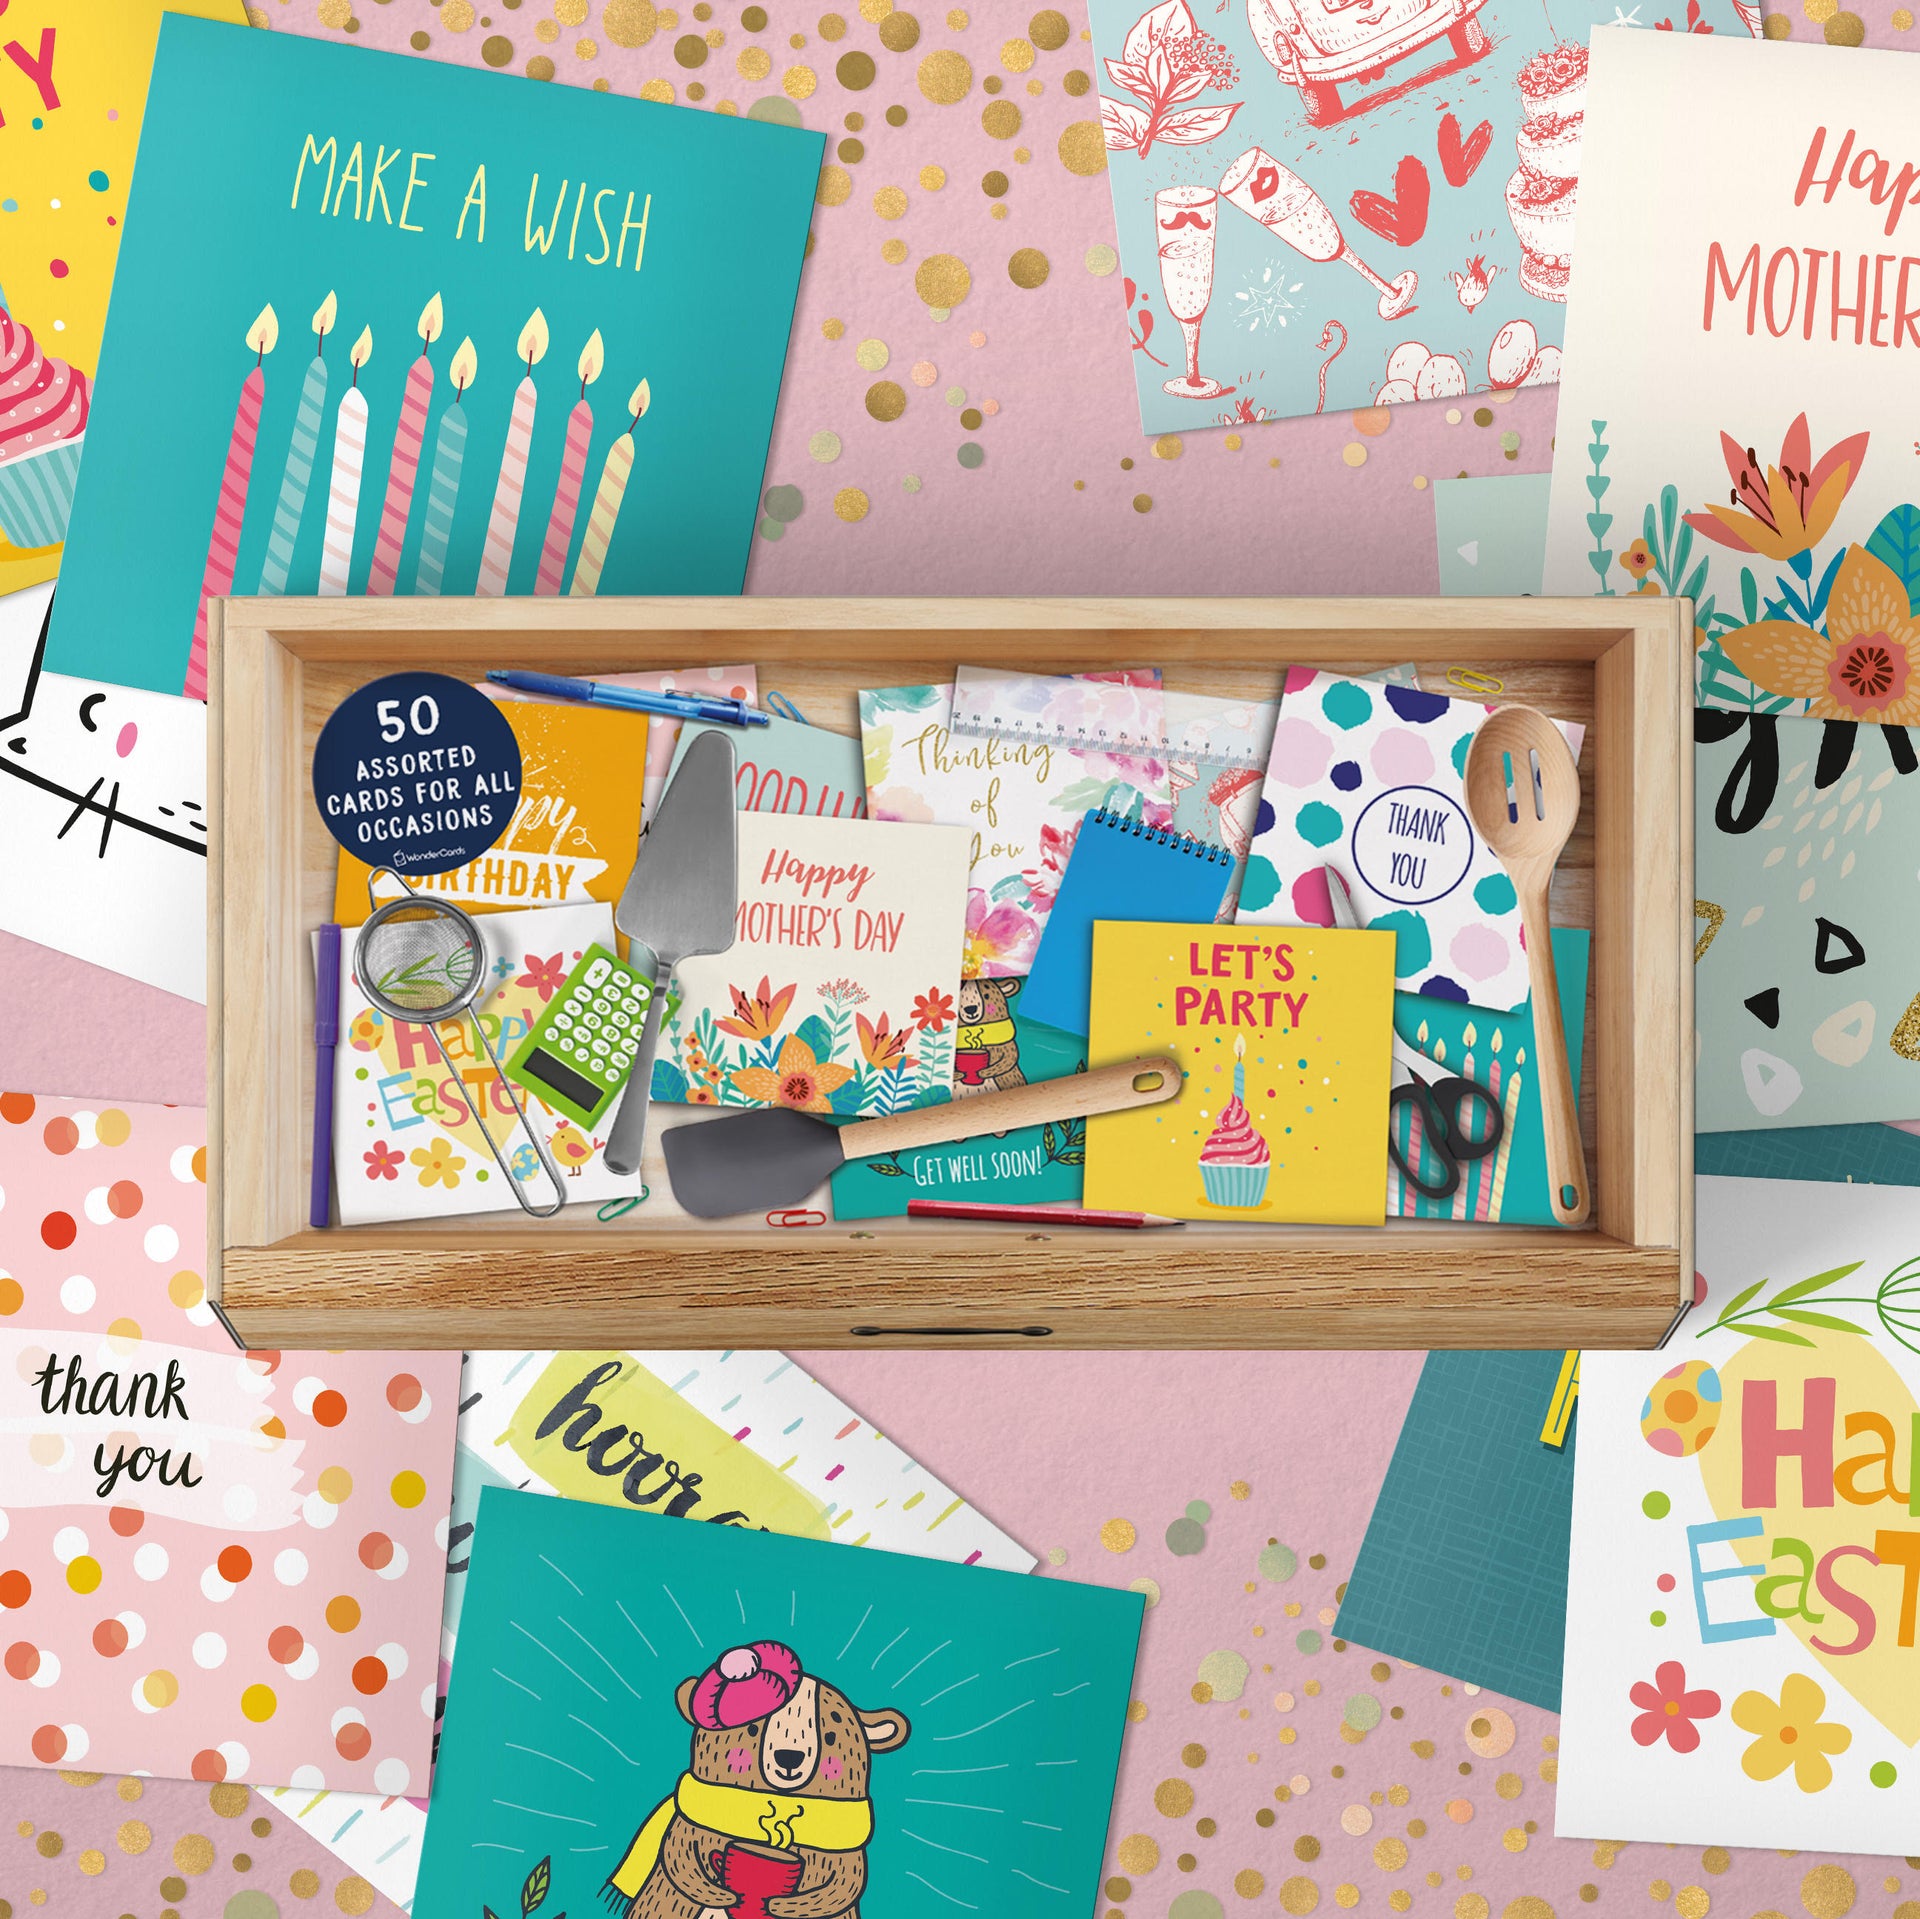 50 Assorted Greetings Cards Pack for All Occasions by Wonder Cards